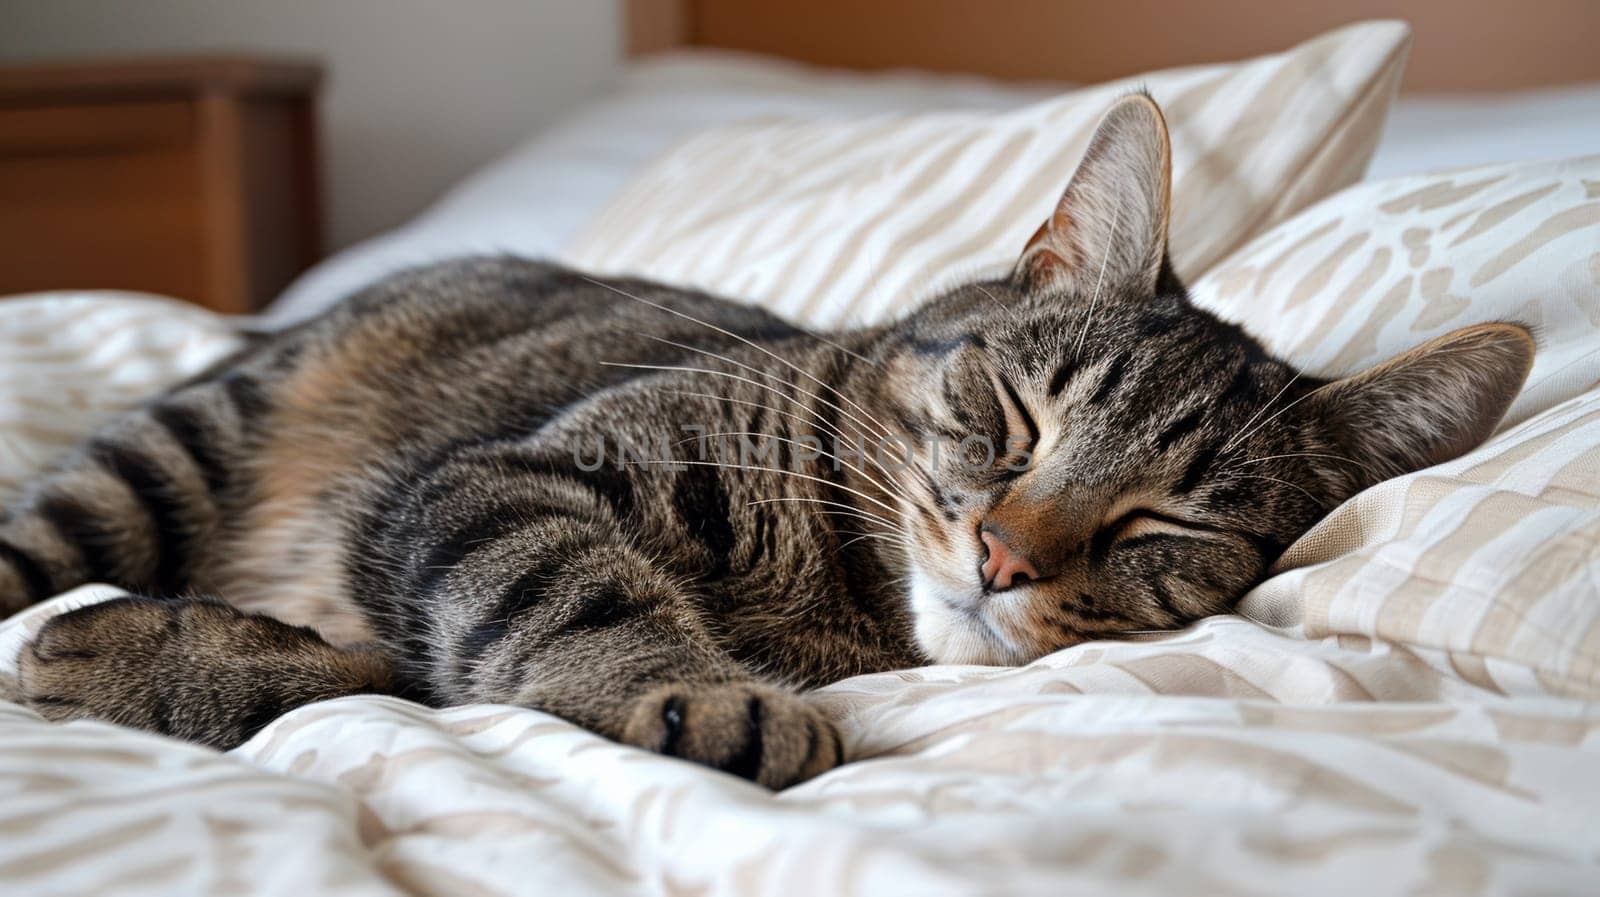 A cat sleeping on a bed with its eyes closed